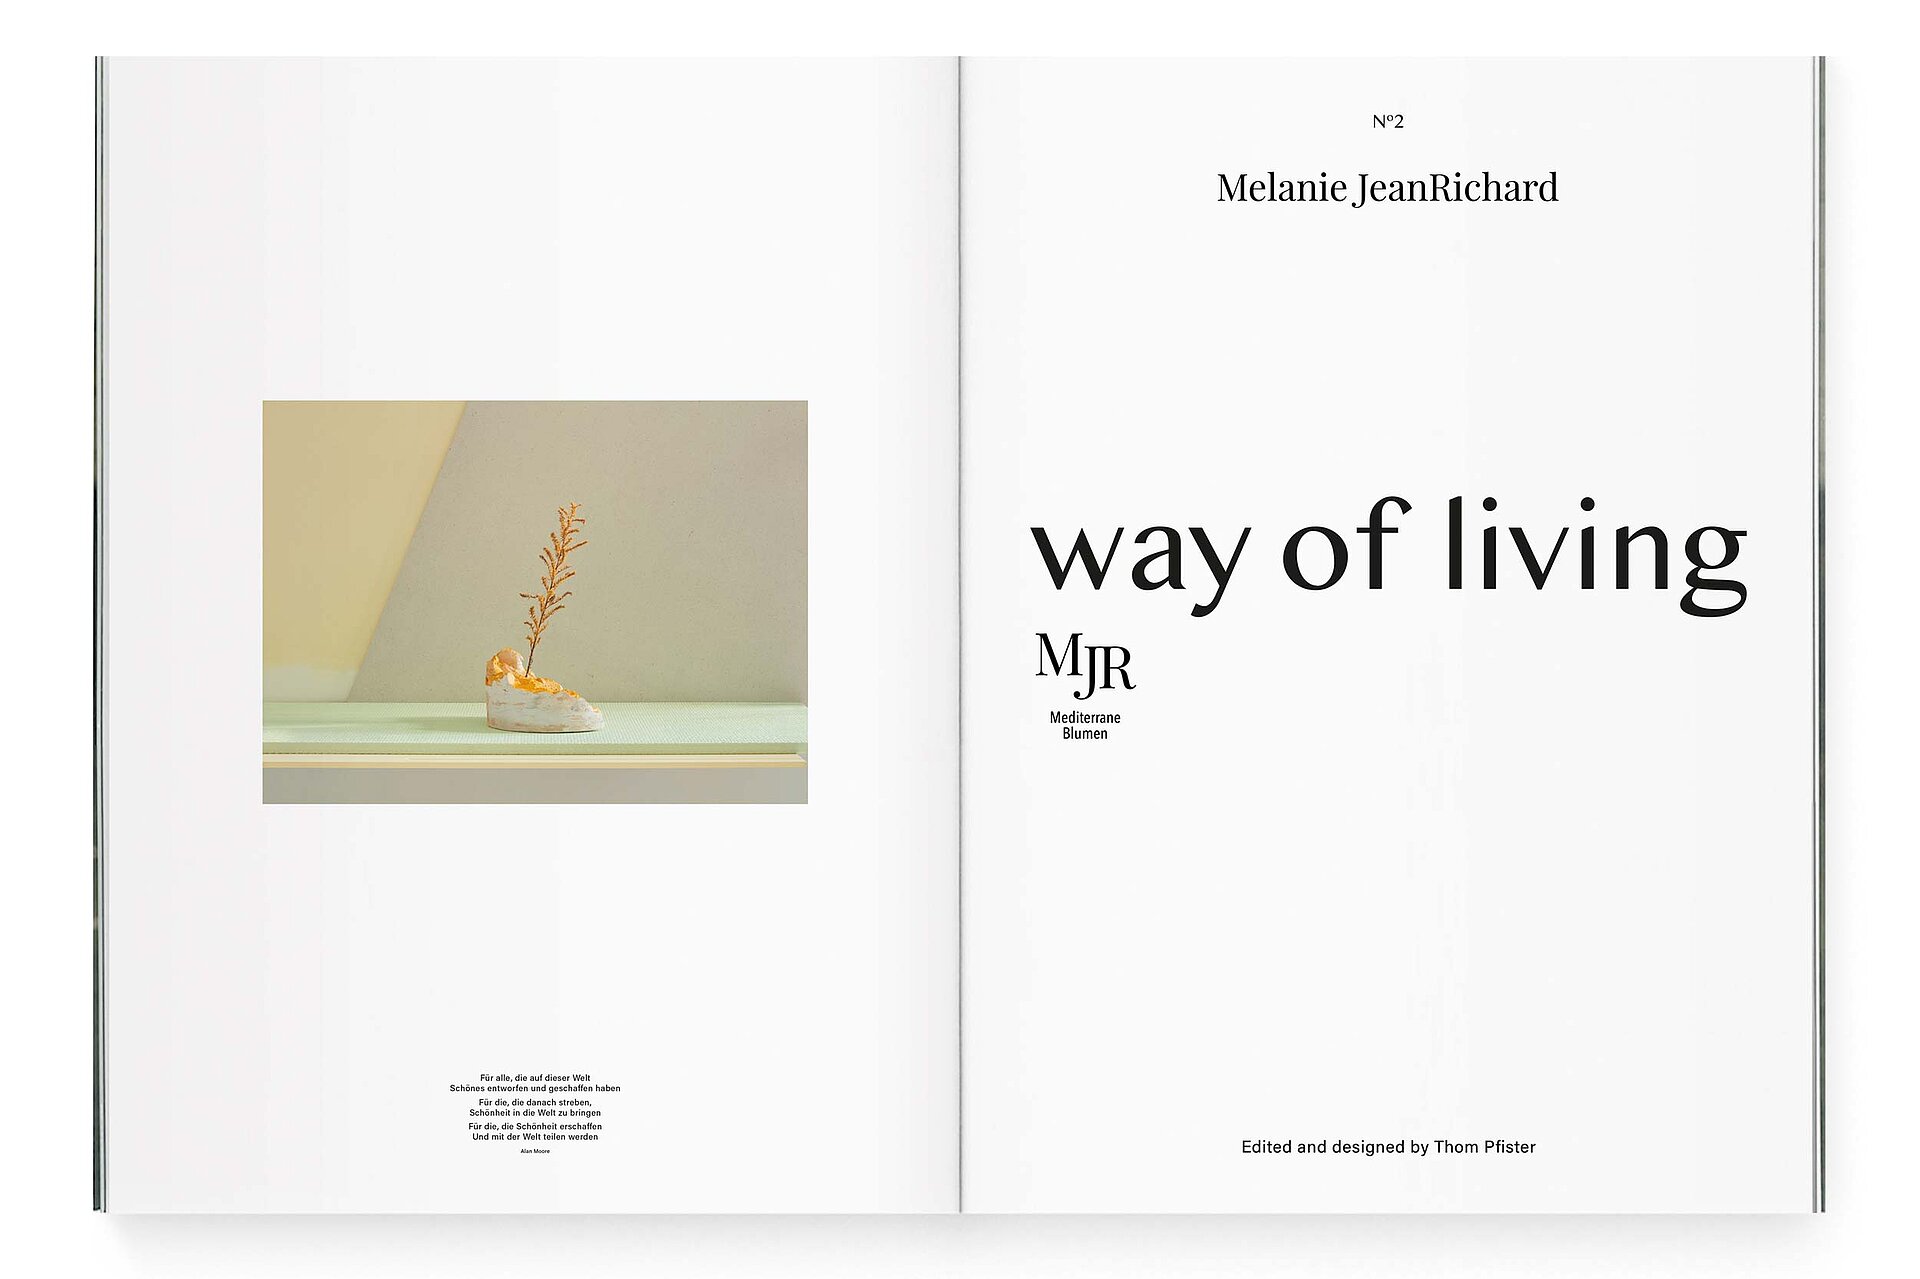 mjr magazine pages with title design bern